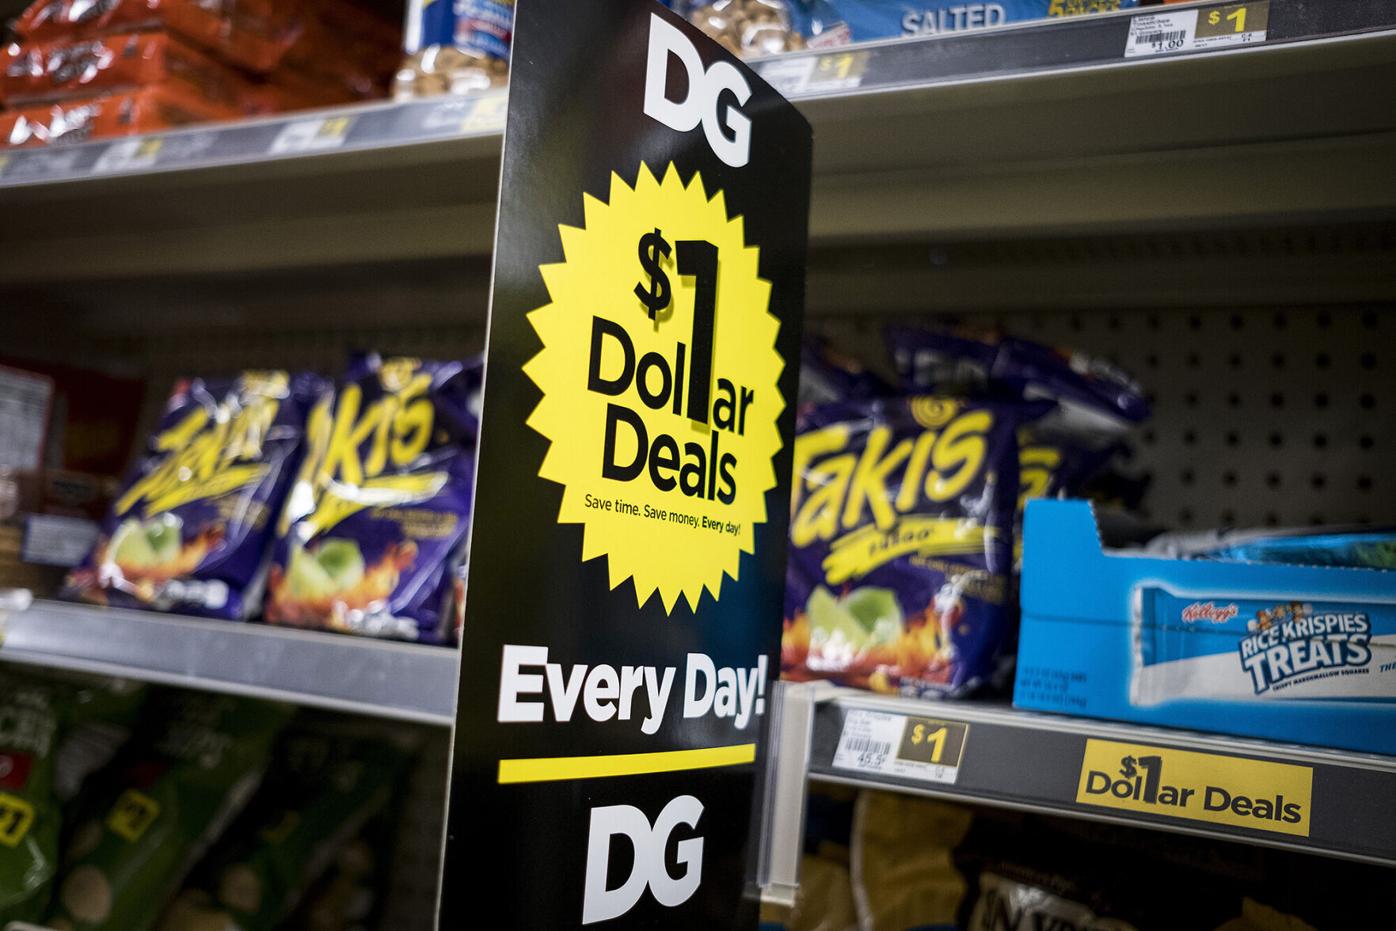 Dollar stores are battling over $1 prices, Business